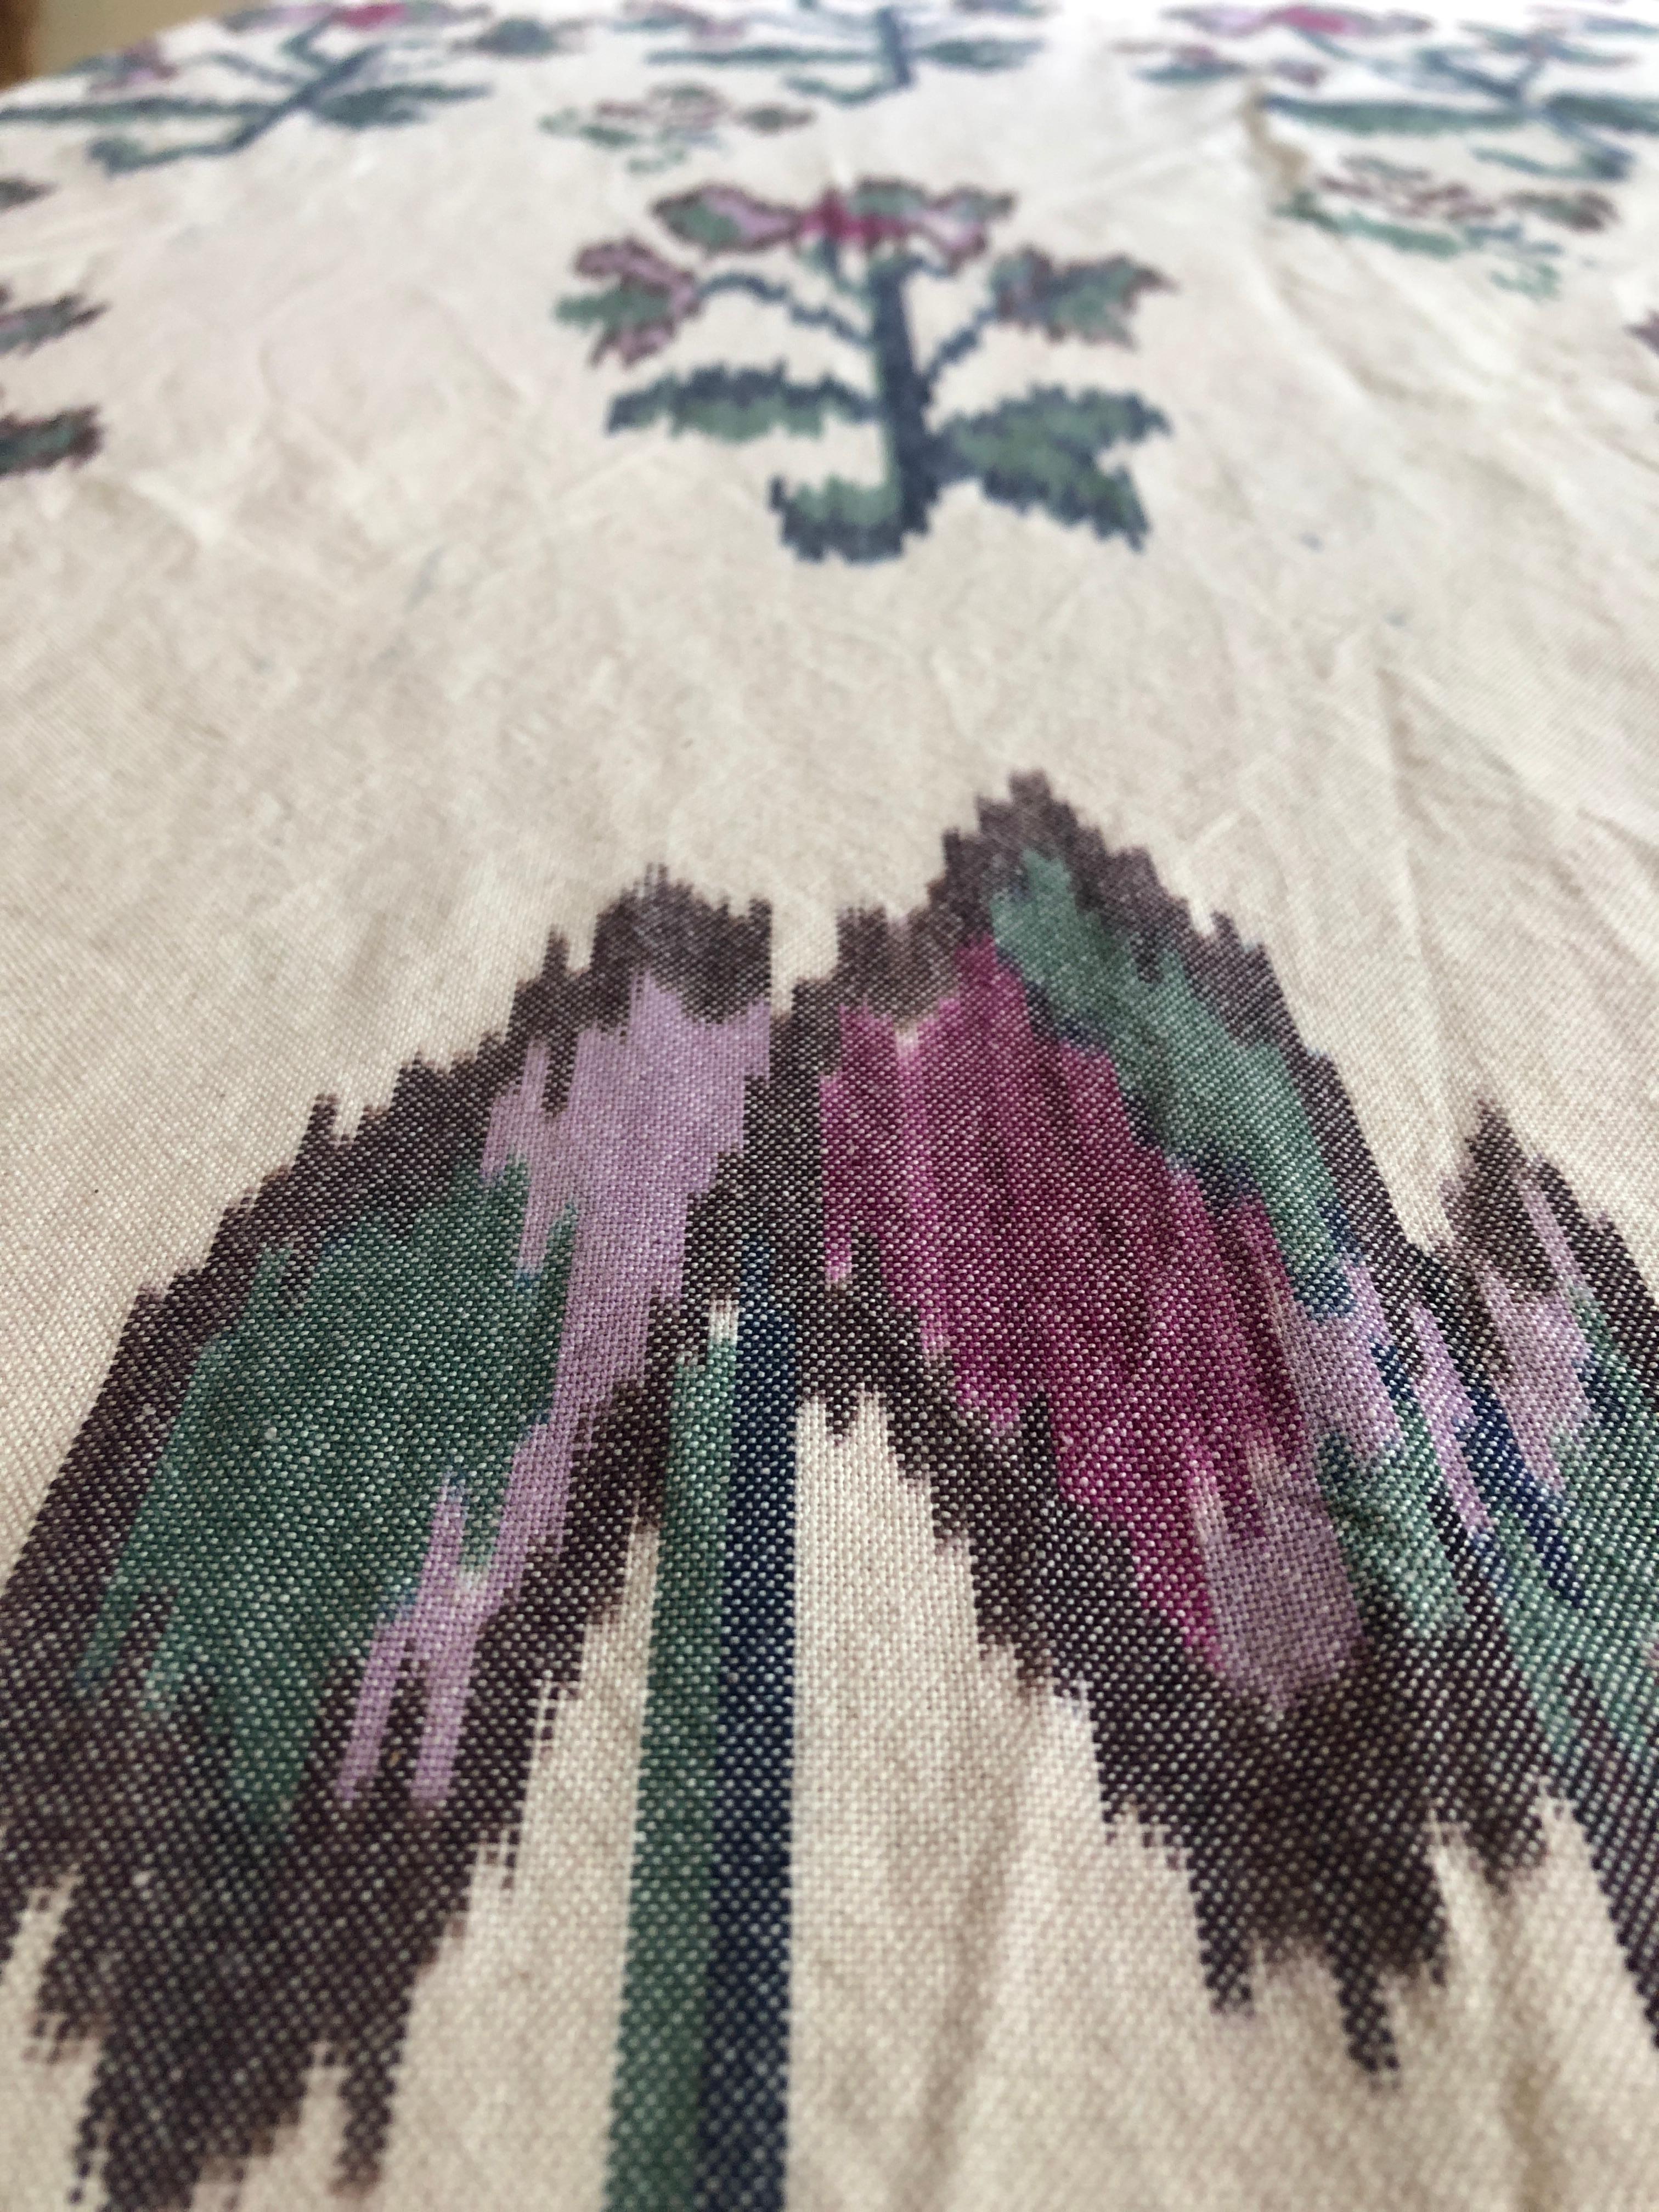 Contemporary Gregory Parkinson Tablecloth with White Ikat Hand-Blocked Patterns 2